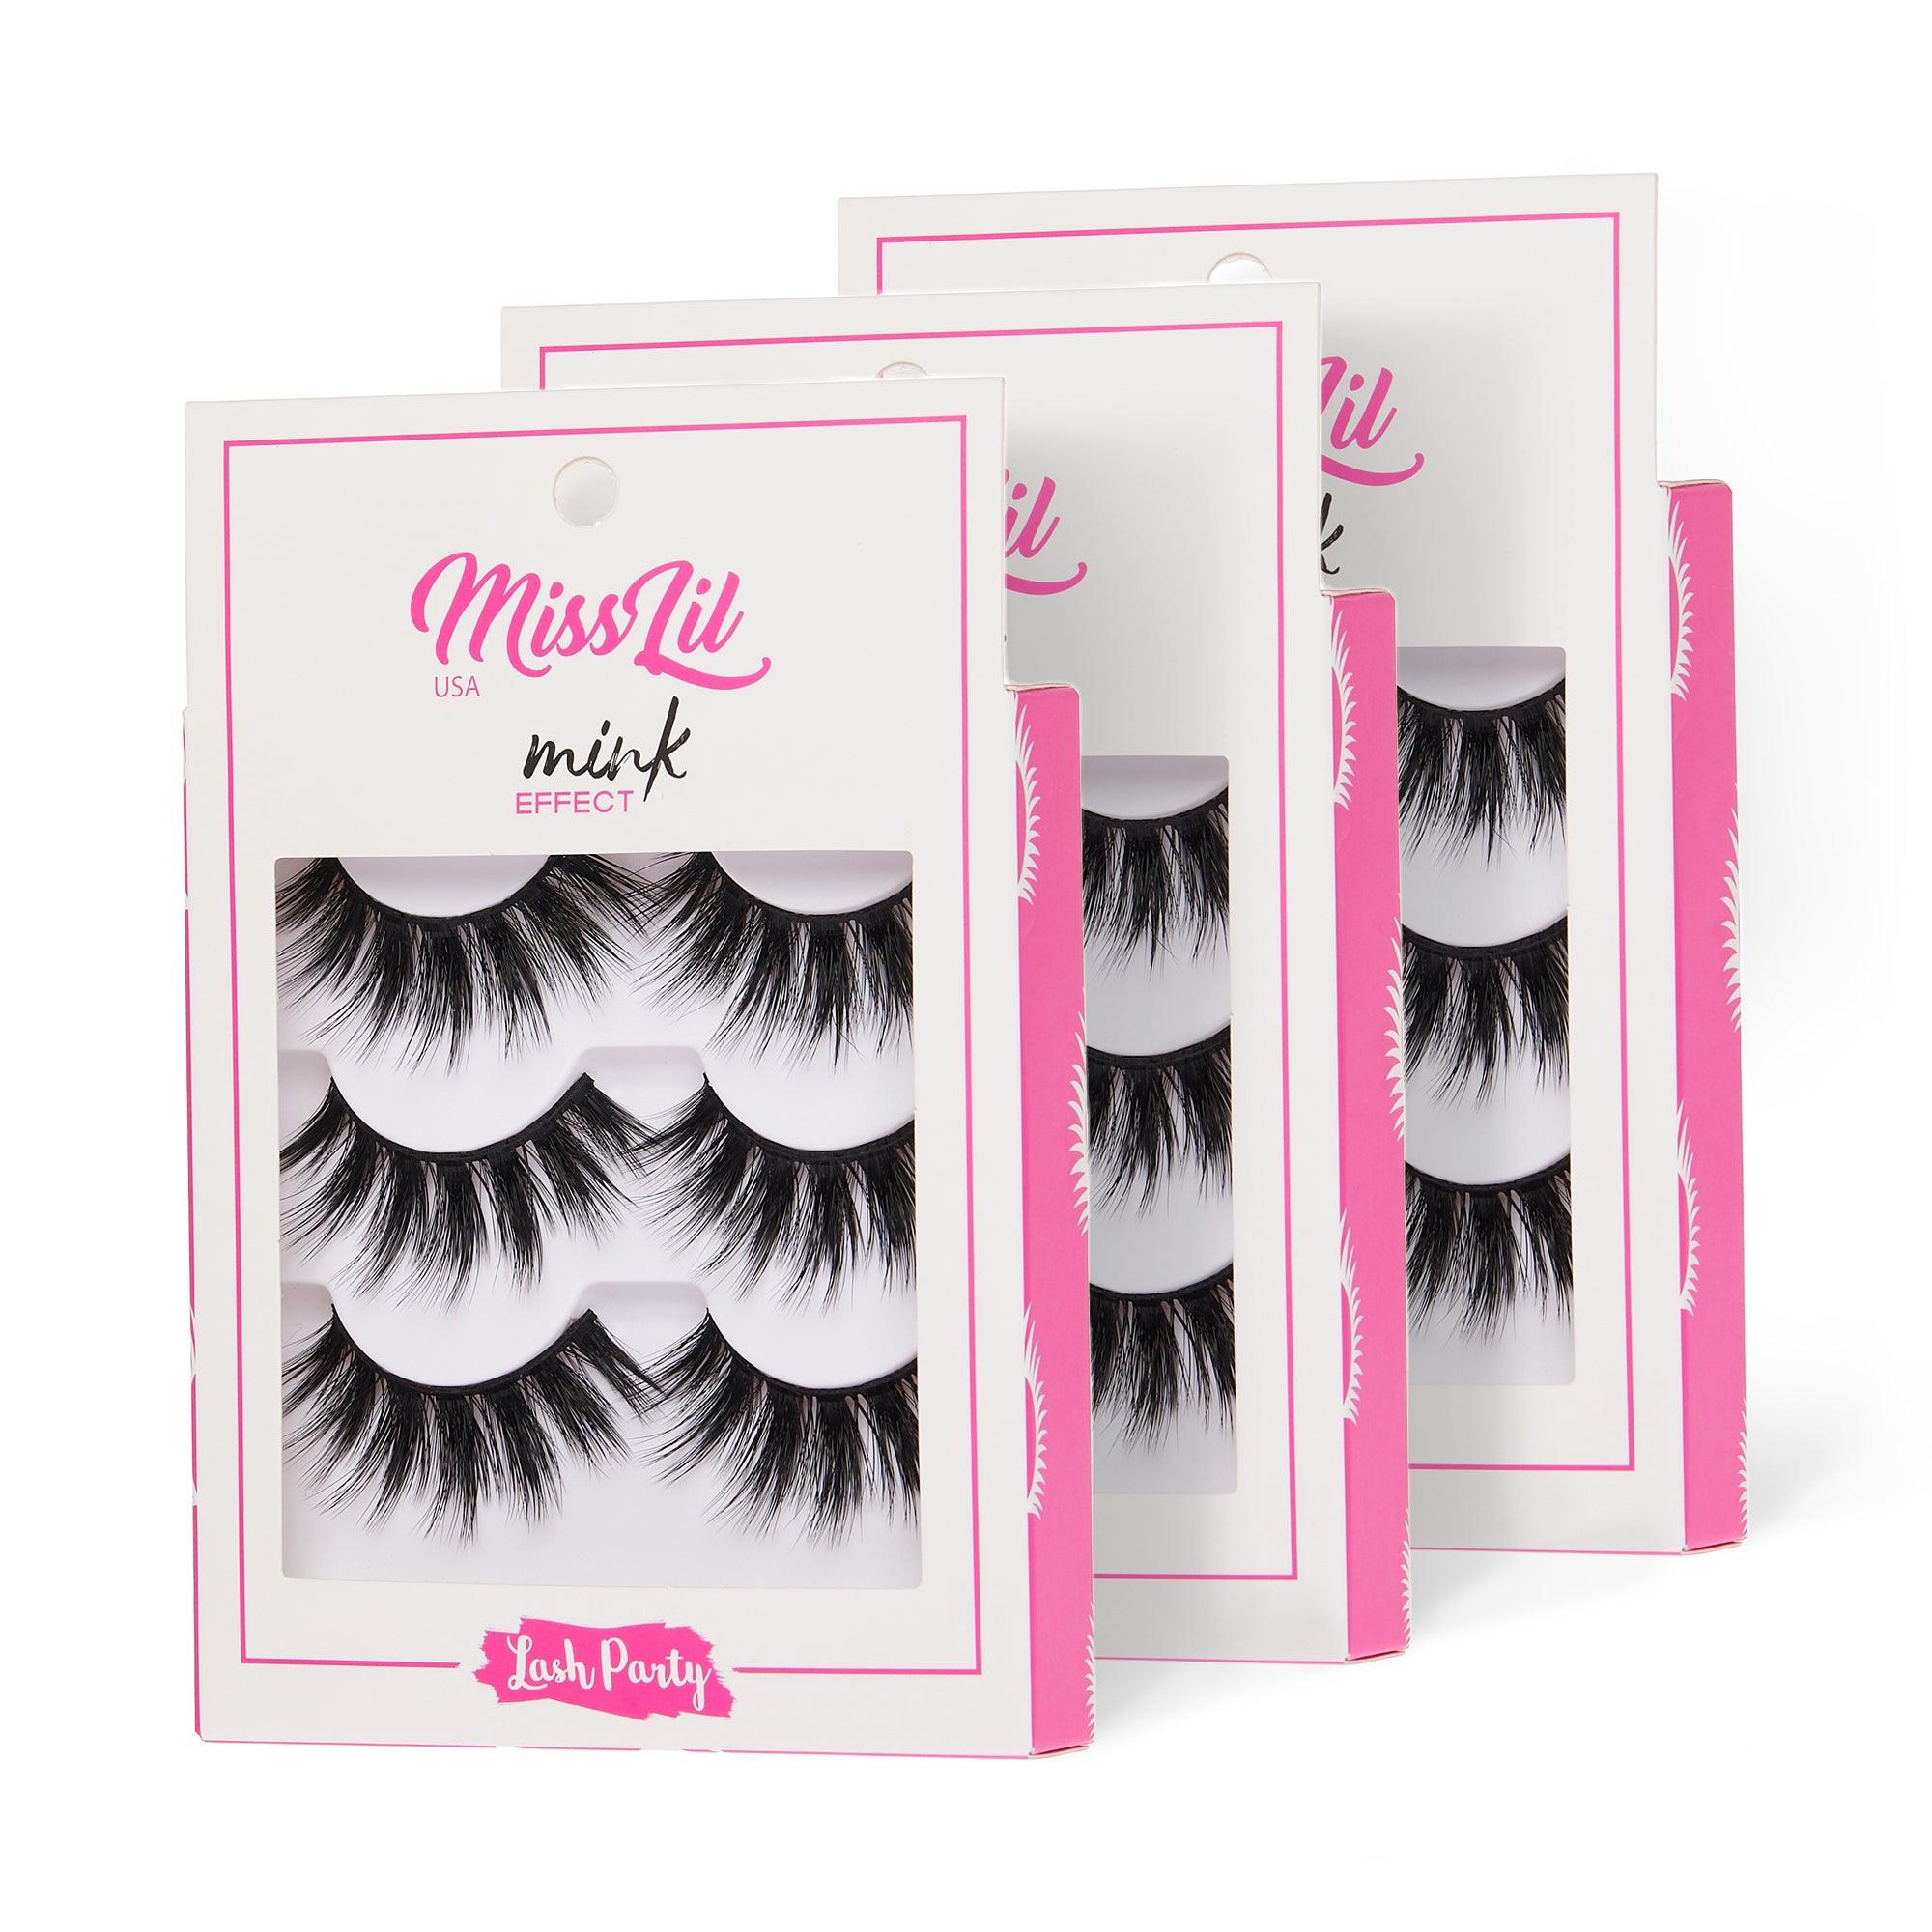 3-Pair Faux Mink Effect Eyelashes - Lash Party Collection #22 - Pack of 3 - Miss Lil USA